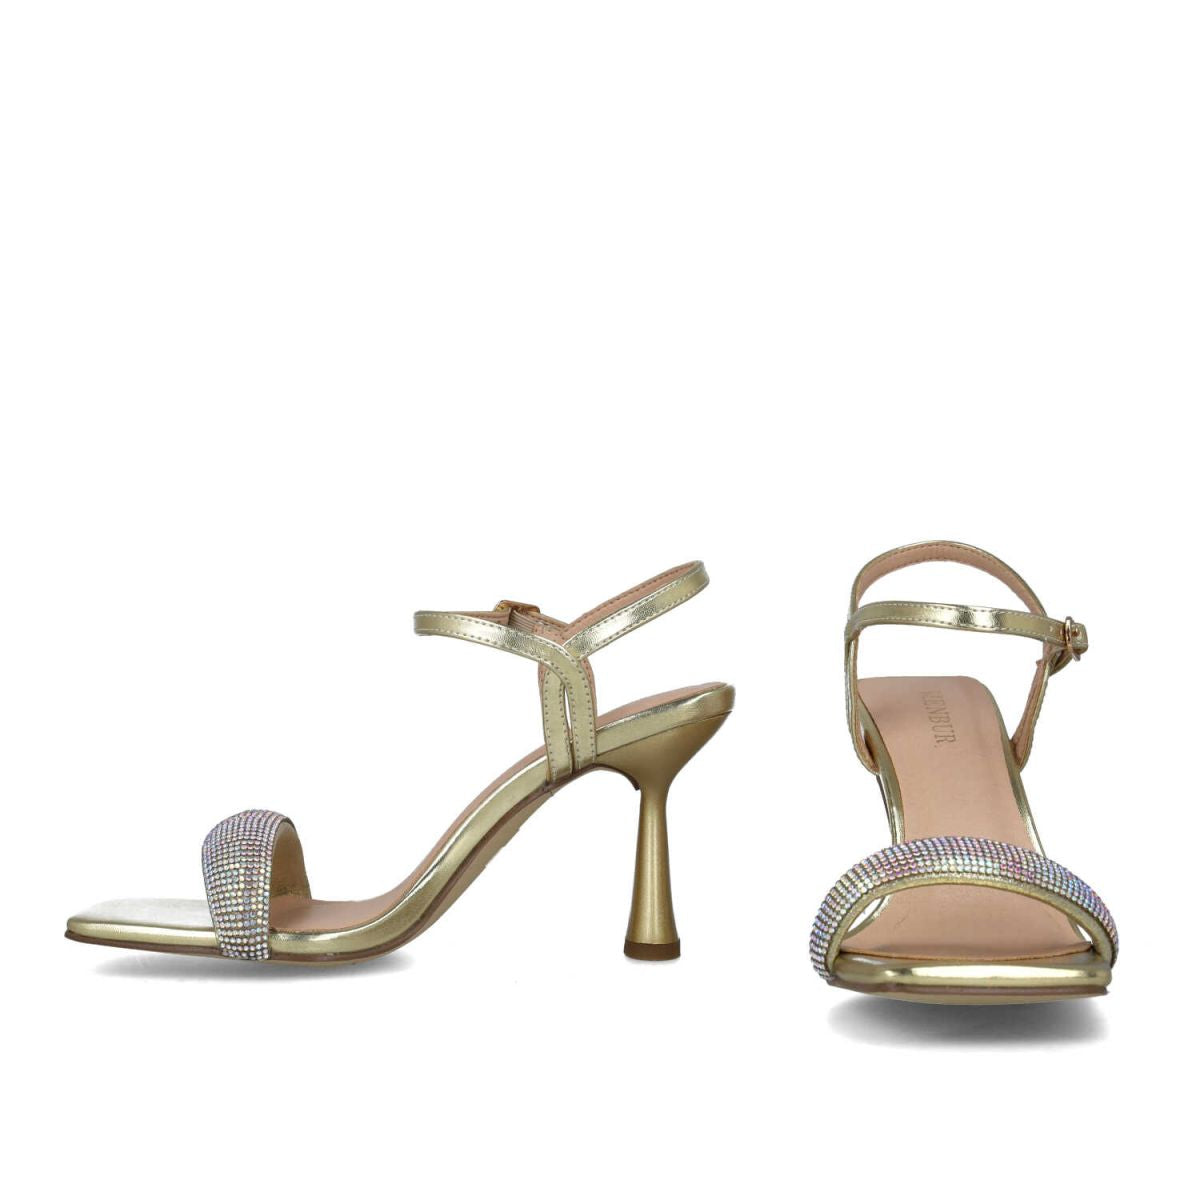 Frontal view of Menbur's Dazzling Gold Square Toe Sandal, highlighting the strap details.